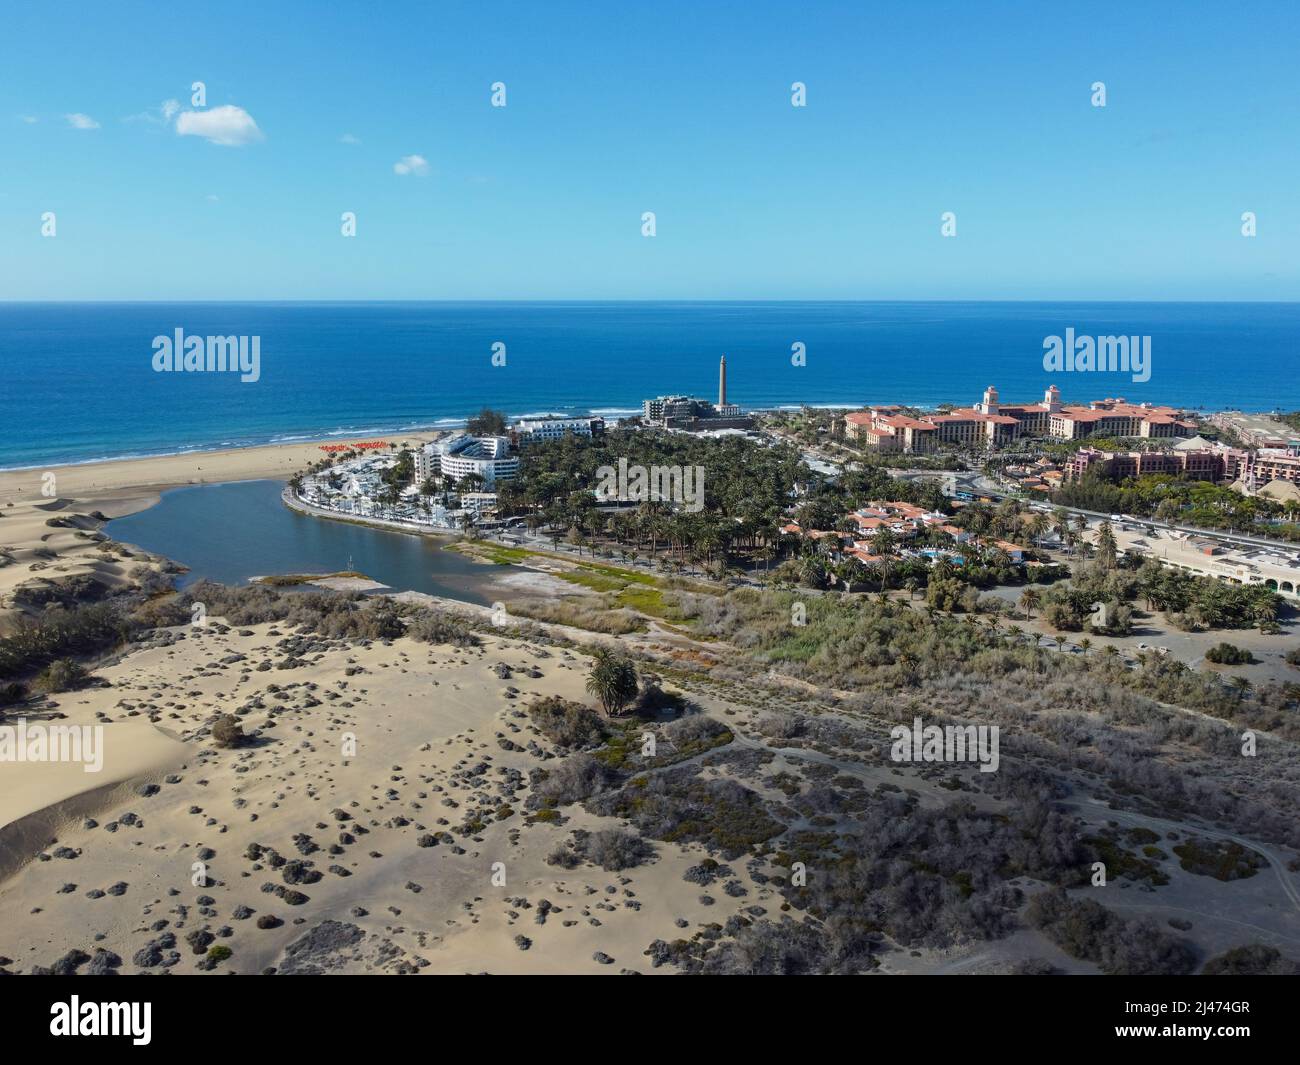 Aerial drone. Popular resort town of Meloneras, with hotels and restaurants, near the Maspalomas dunes in Gran Canaria, Canary Islands, Spain Stock Photo